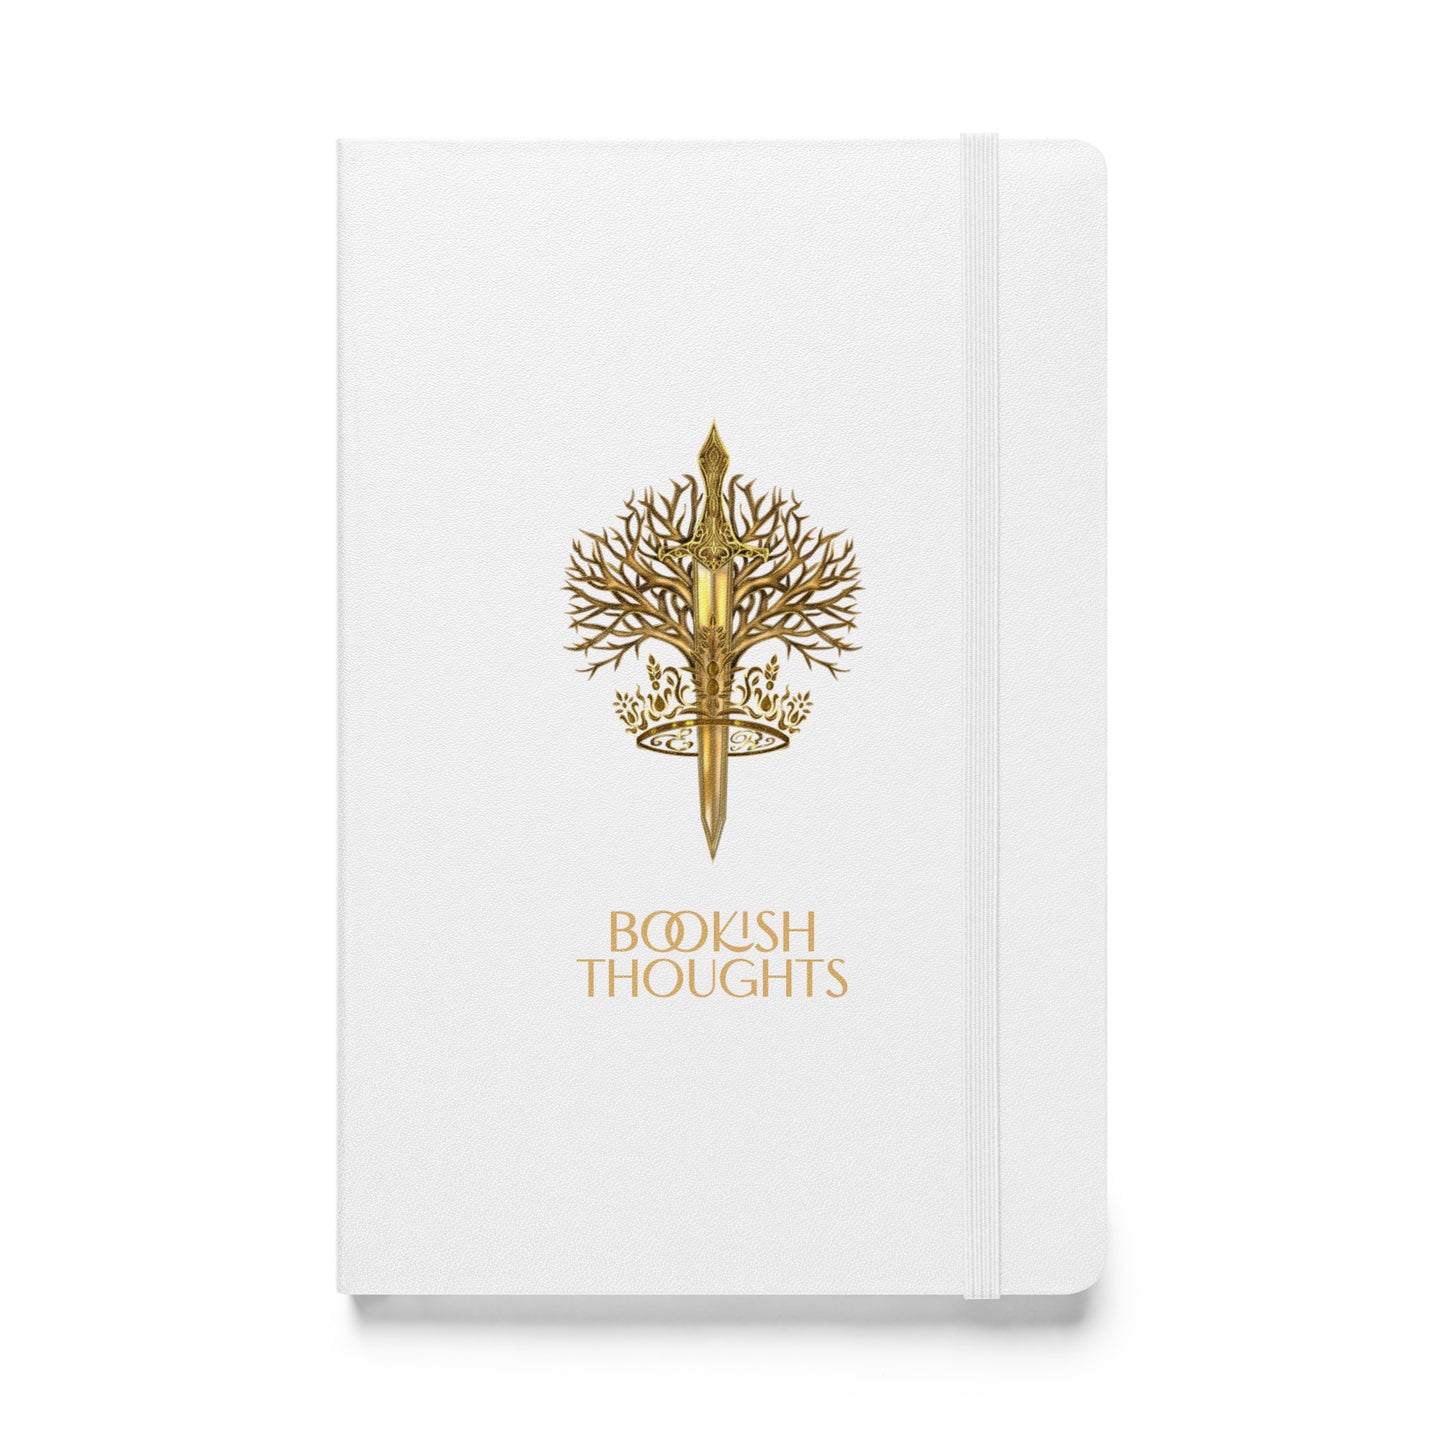 Bookish Thoughts Hardcover bound notebook